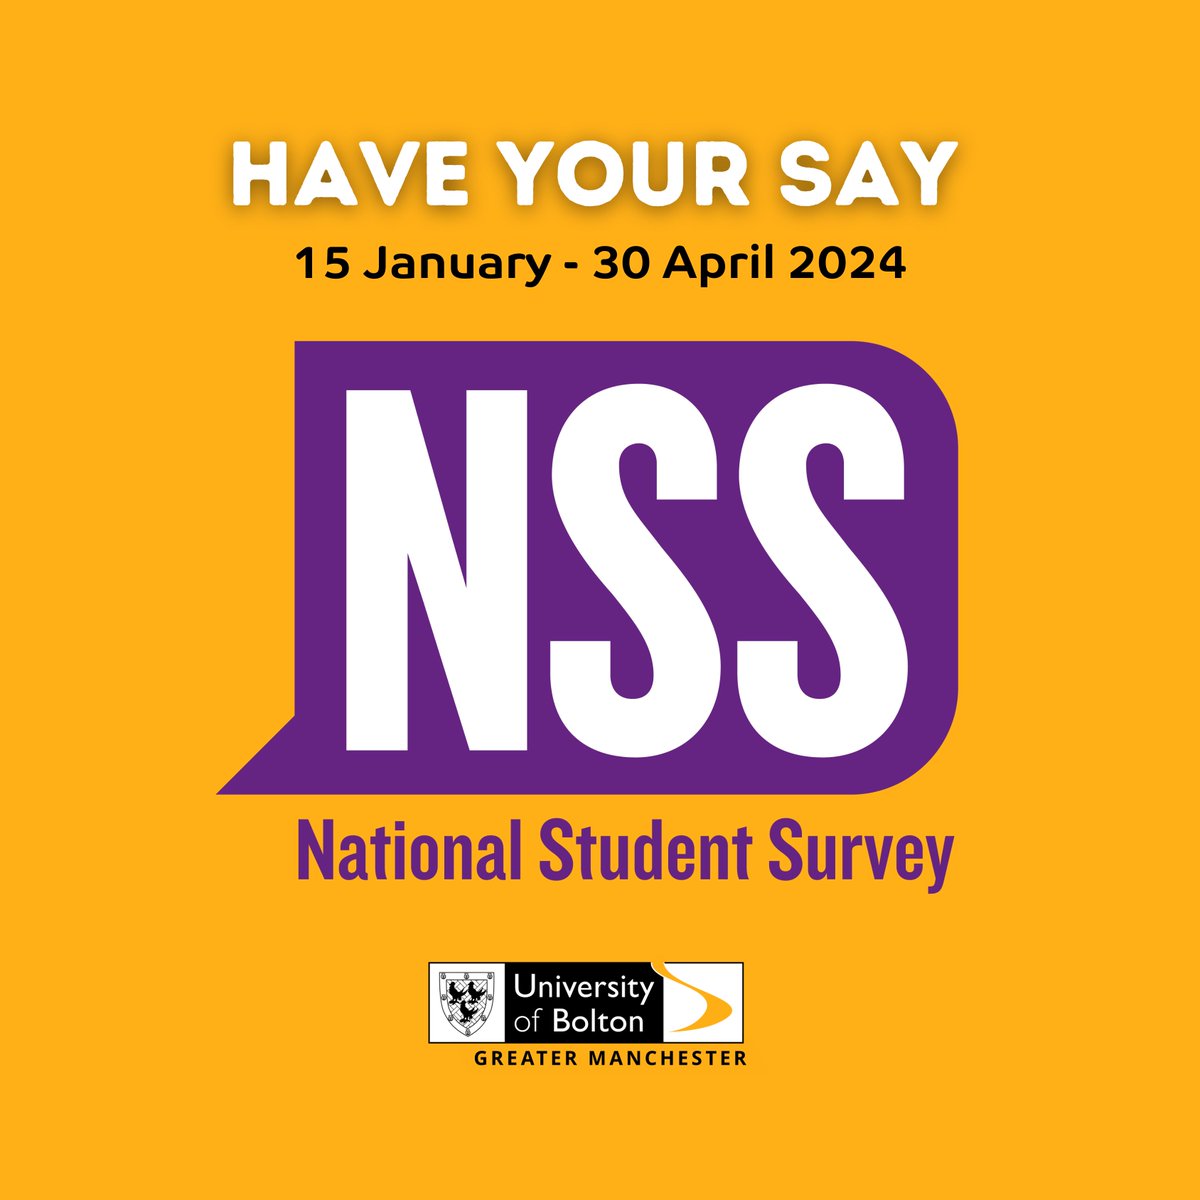 The National Student Survey (NSS) is launching at the University of Bolton on Monday 15 January 2024 🎉

We want your views. It’s your NSS. #NSS #NationalStudentSurvey #YourViewsYourNSS